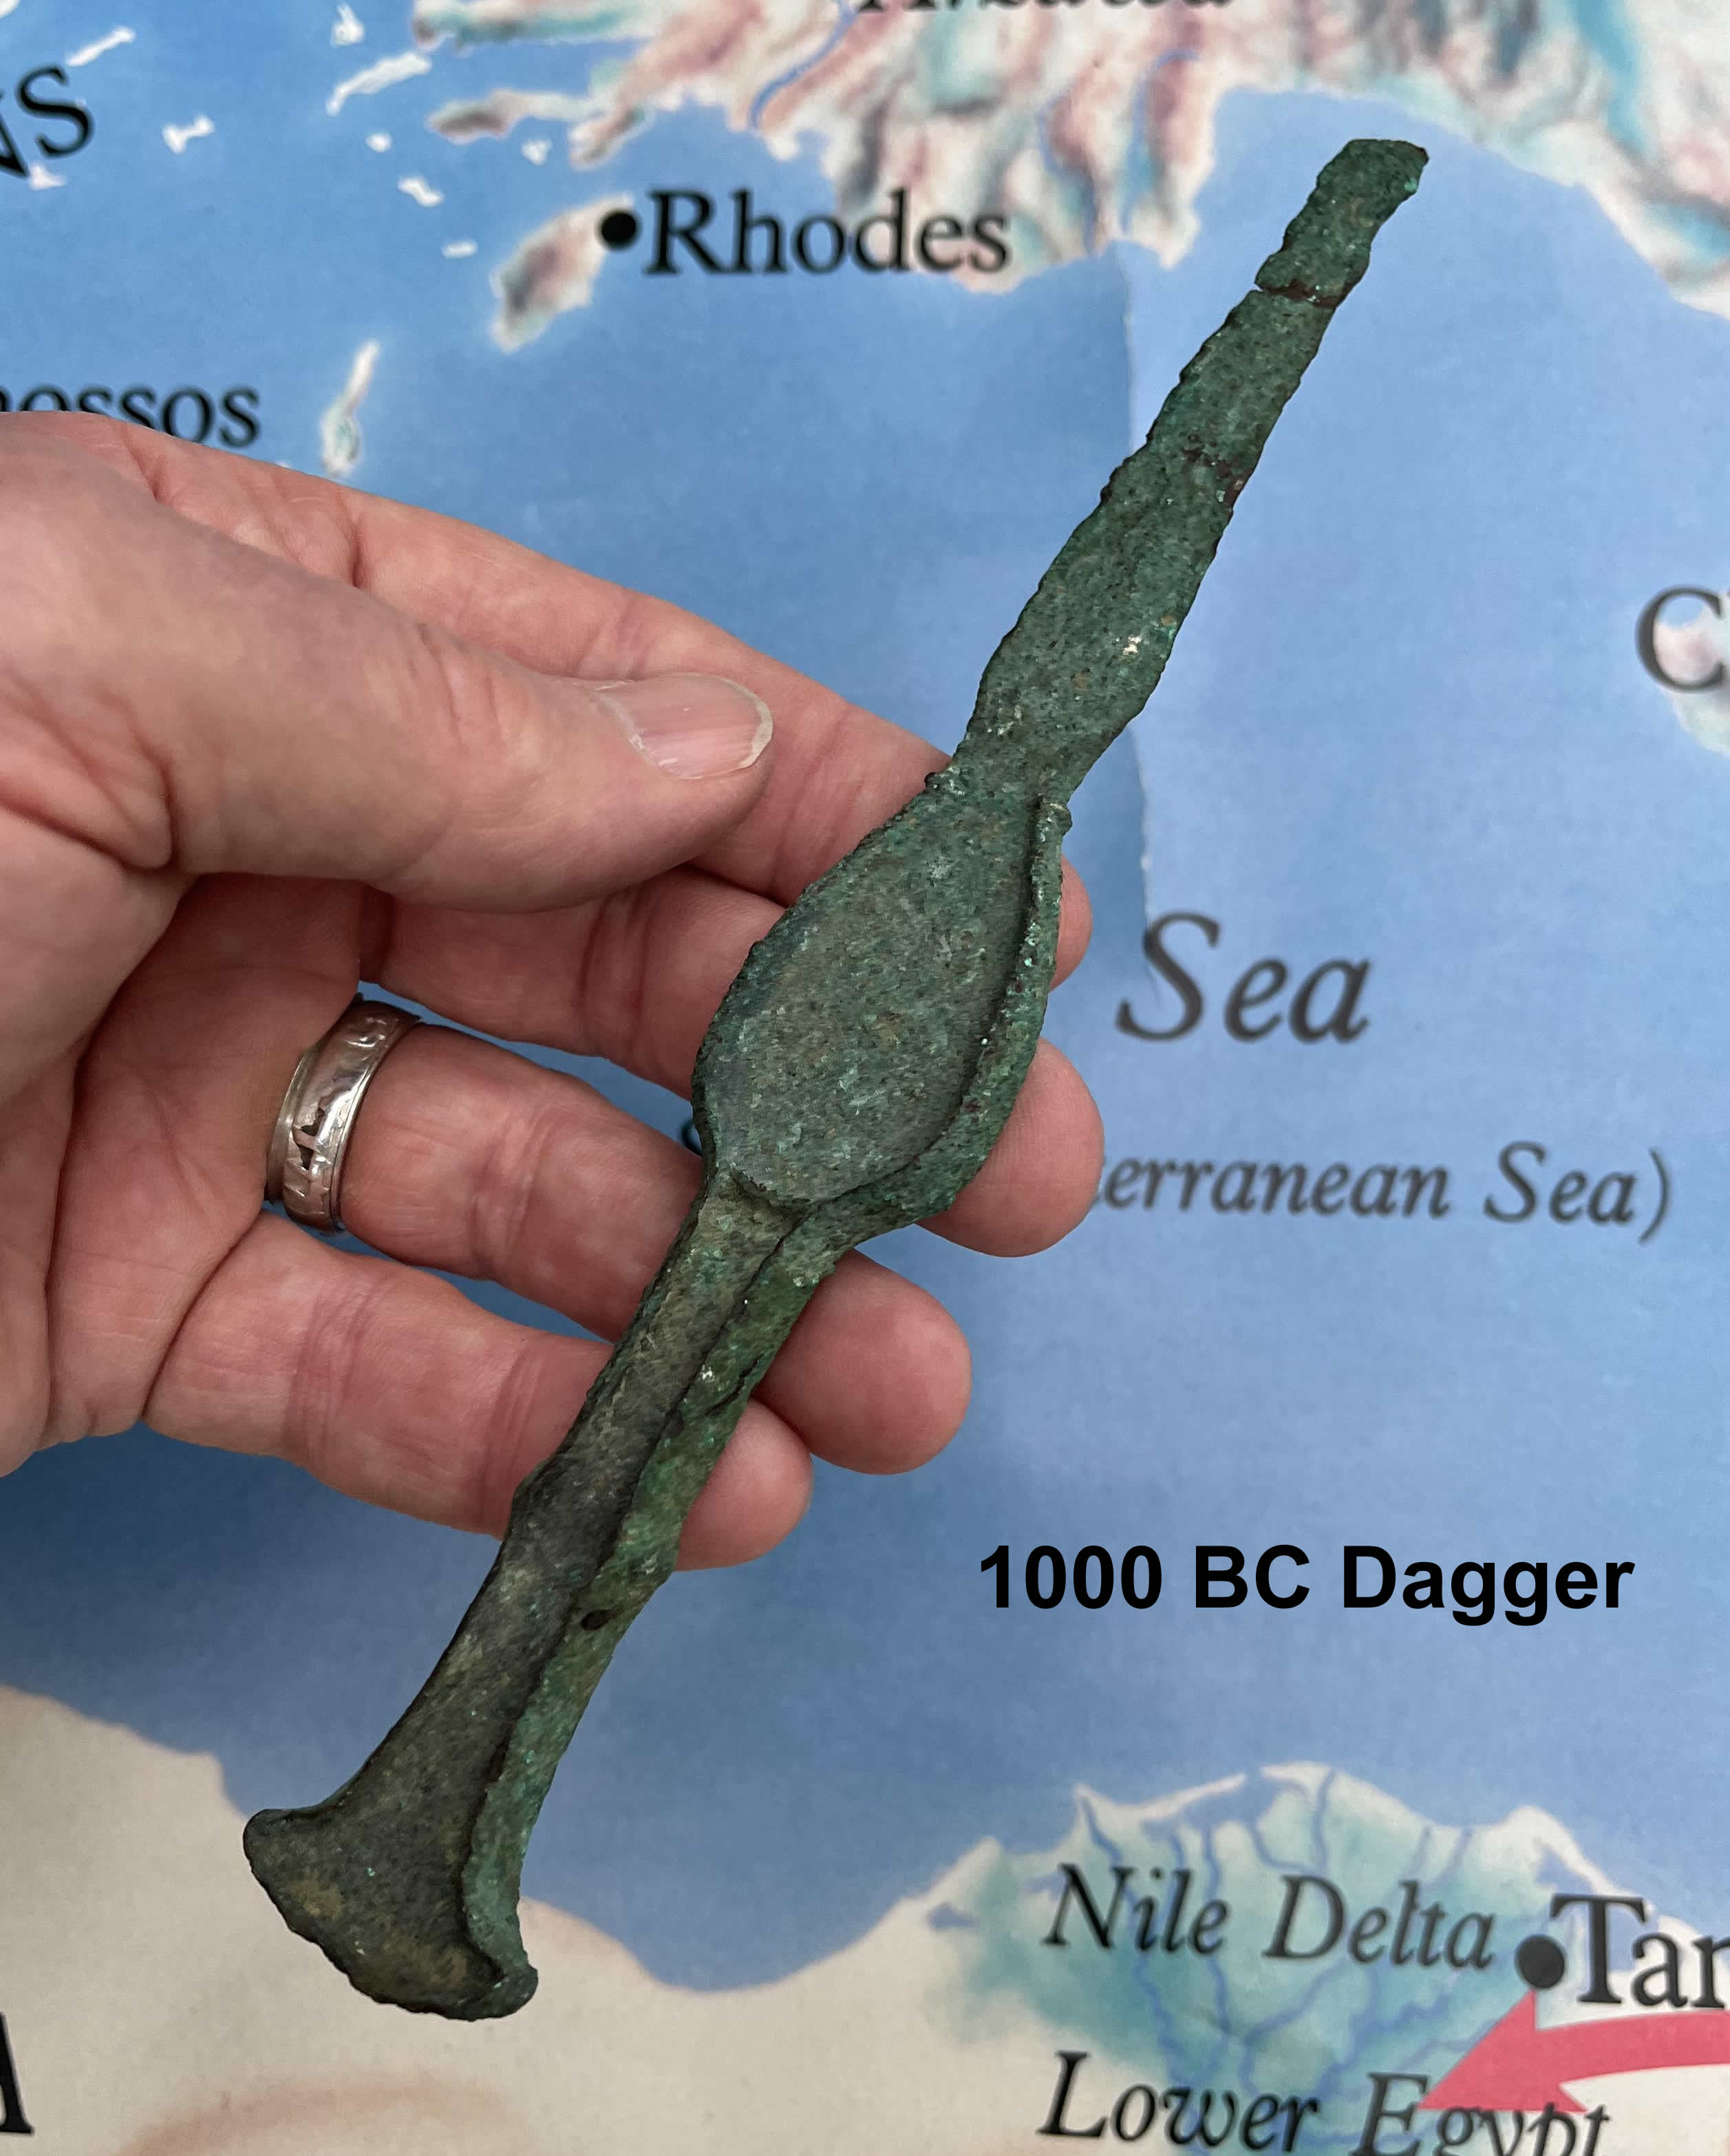 1000 BC Dagger side view